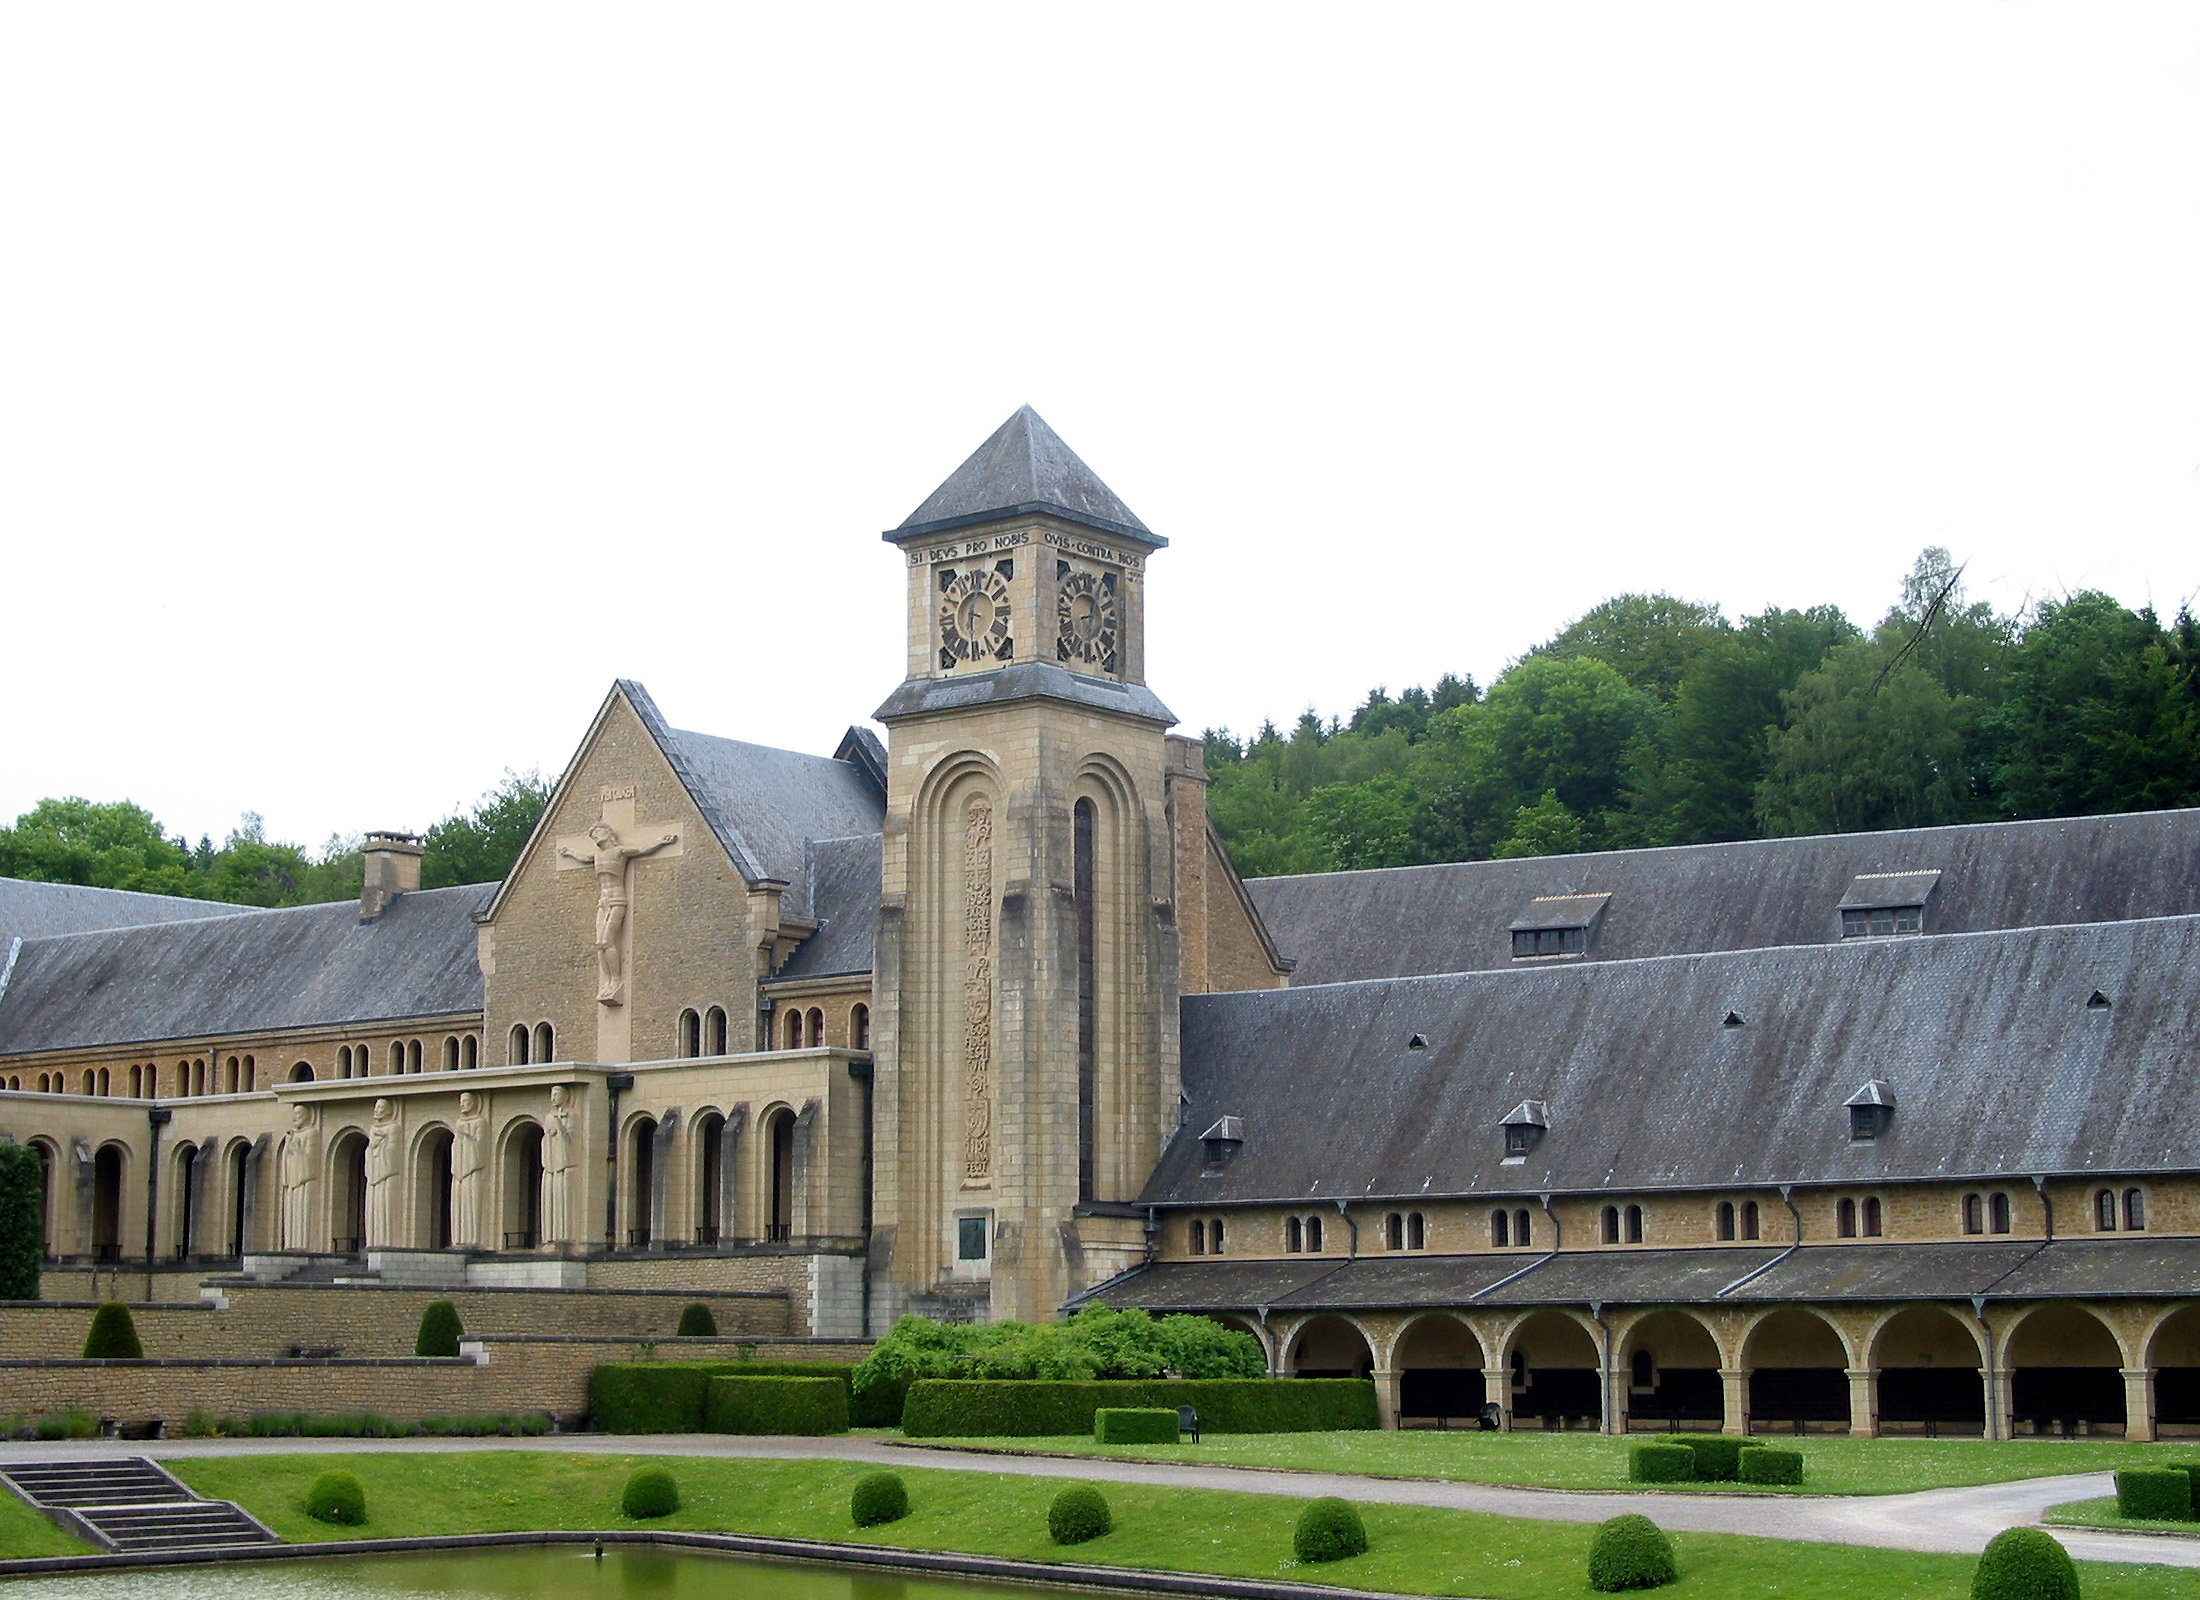  Notre Dame d’Orval monastery